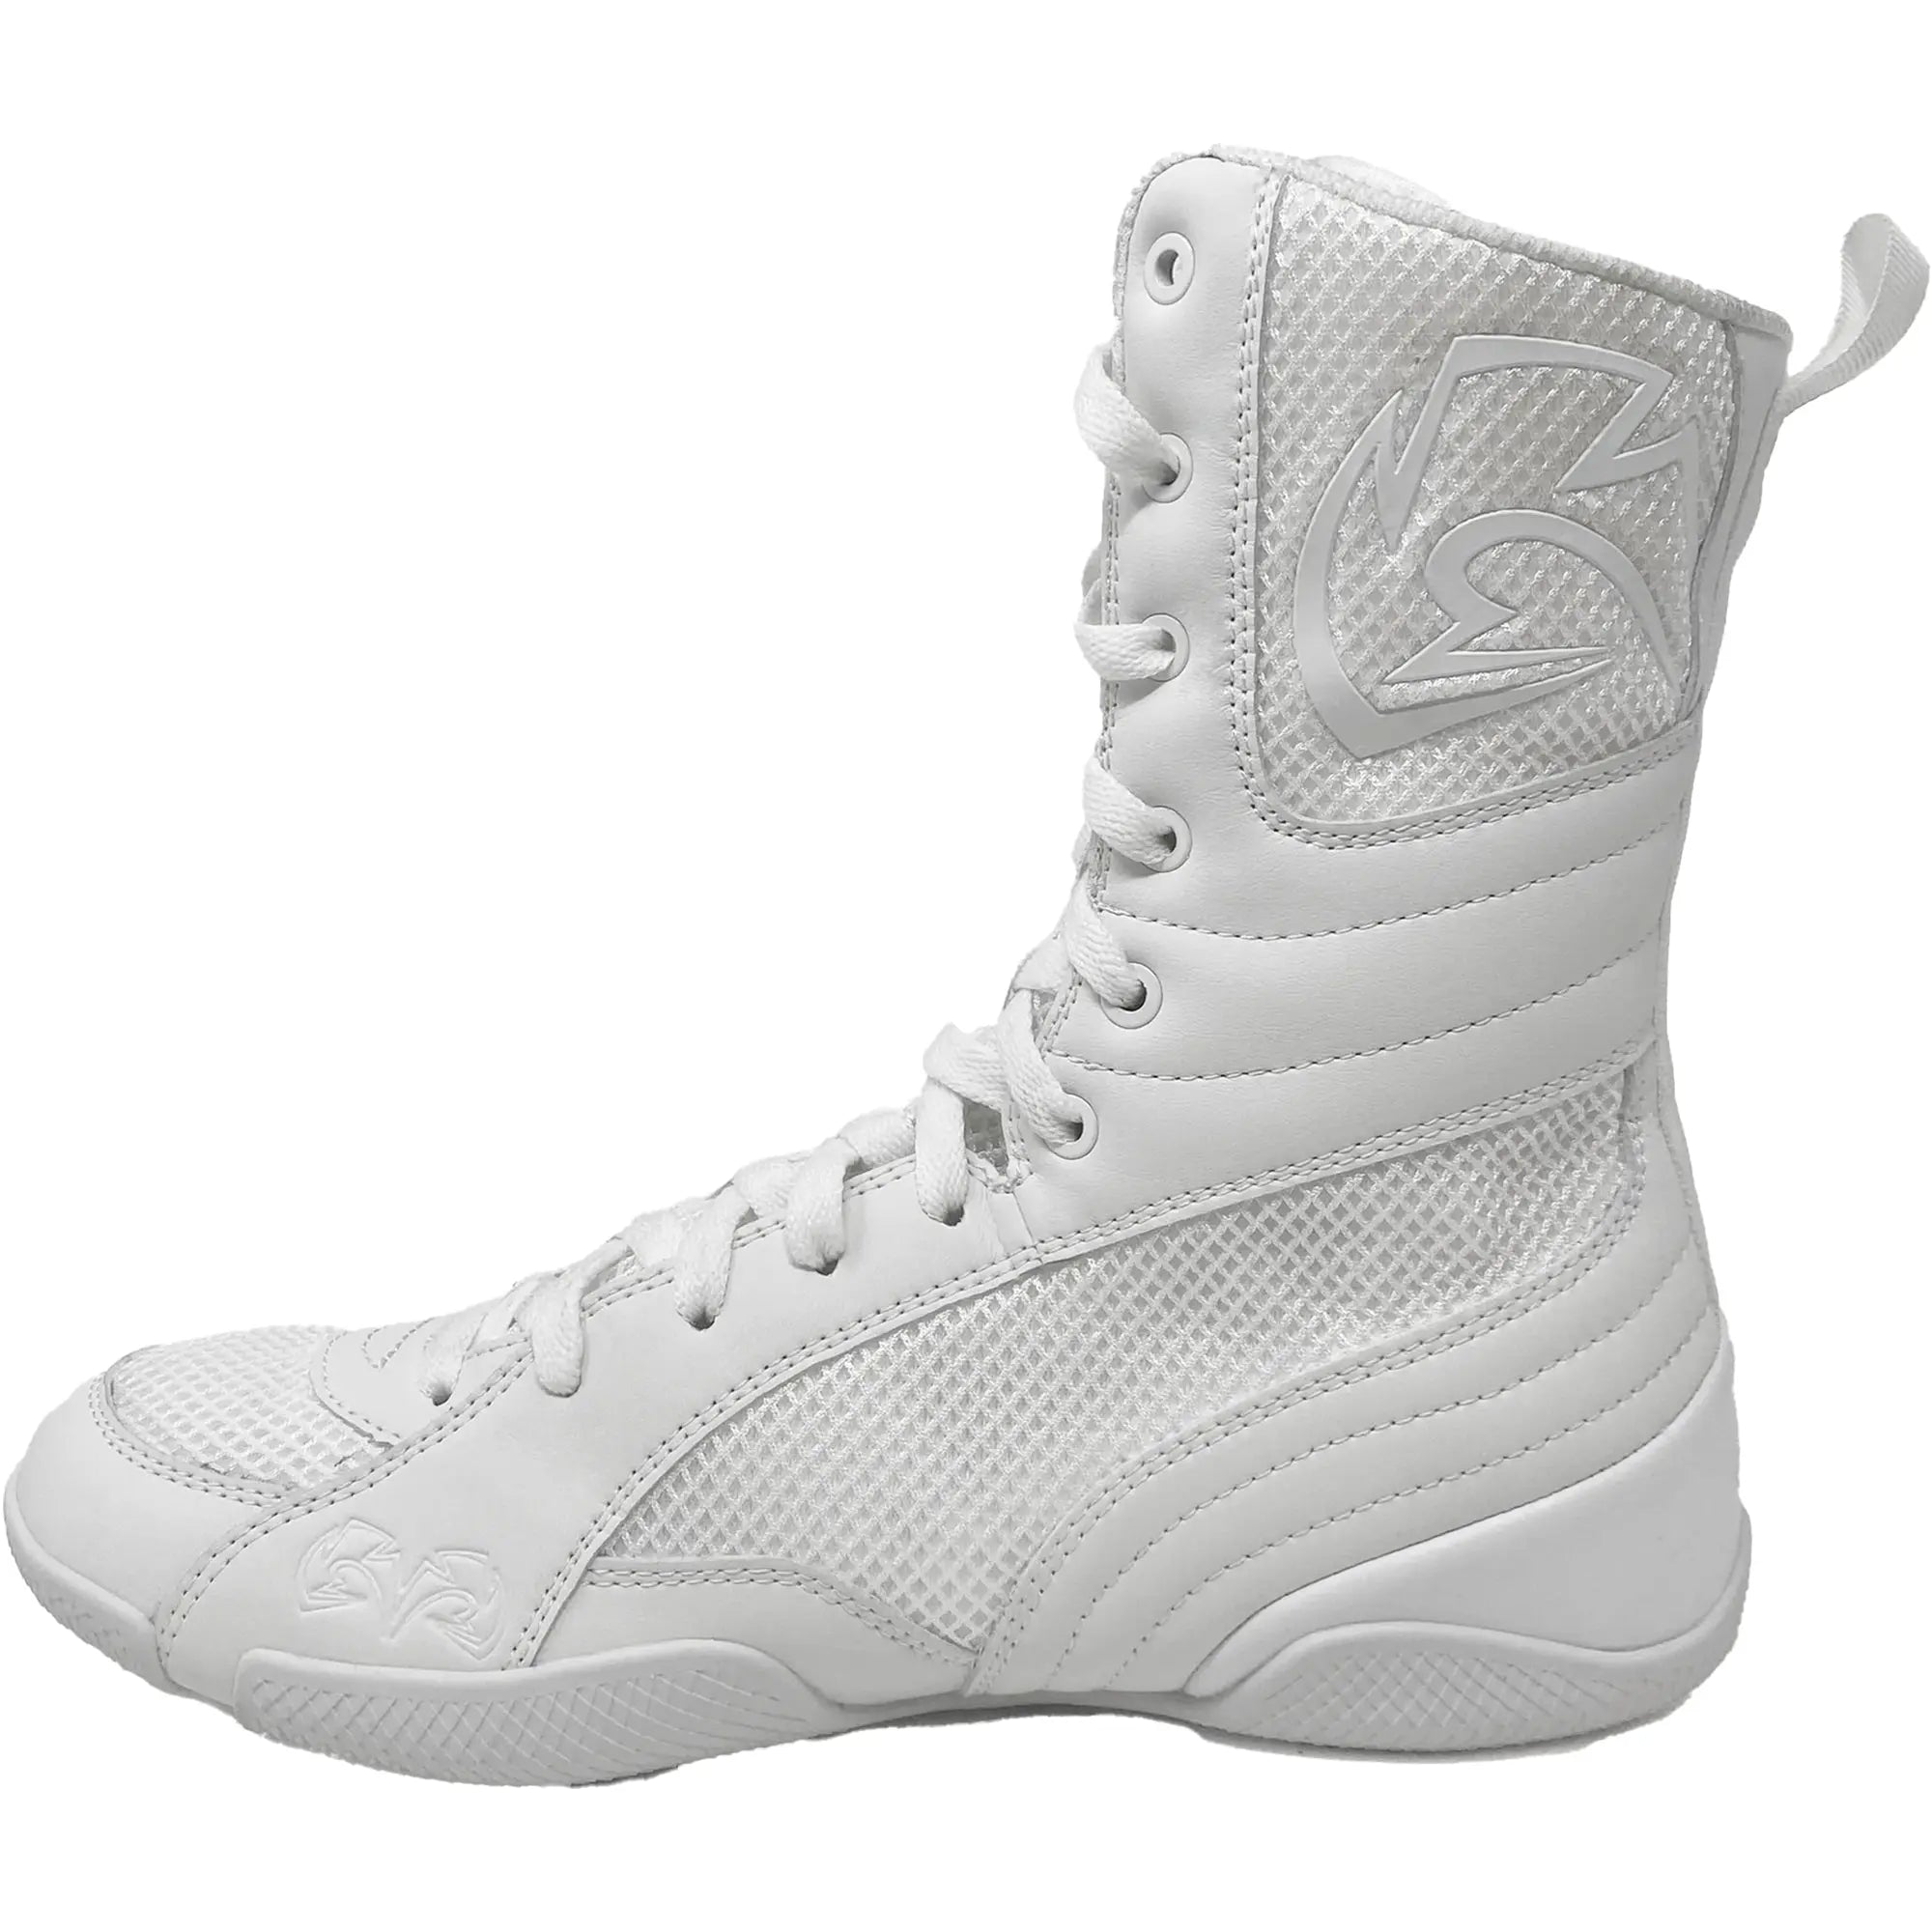 Rival Boxing RSX-Genesis 3 High-Top Boxing Boots Rival